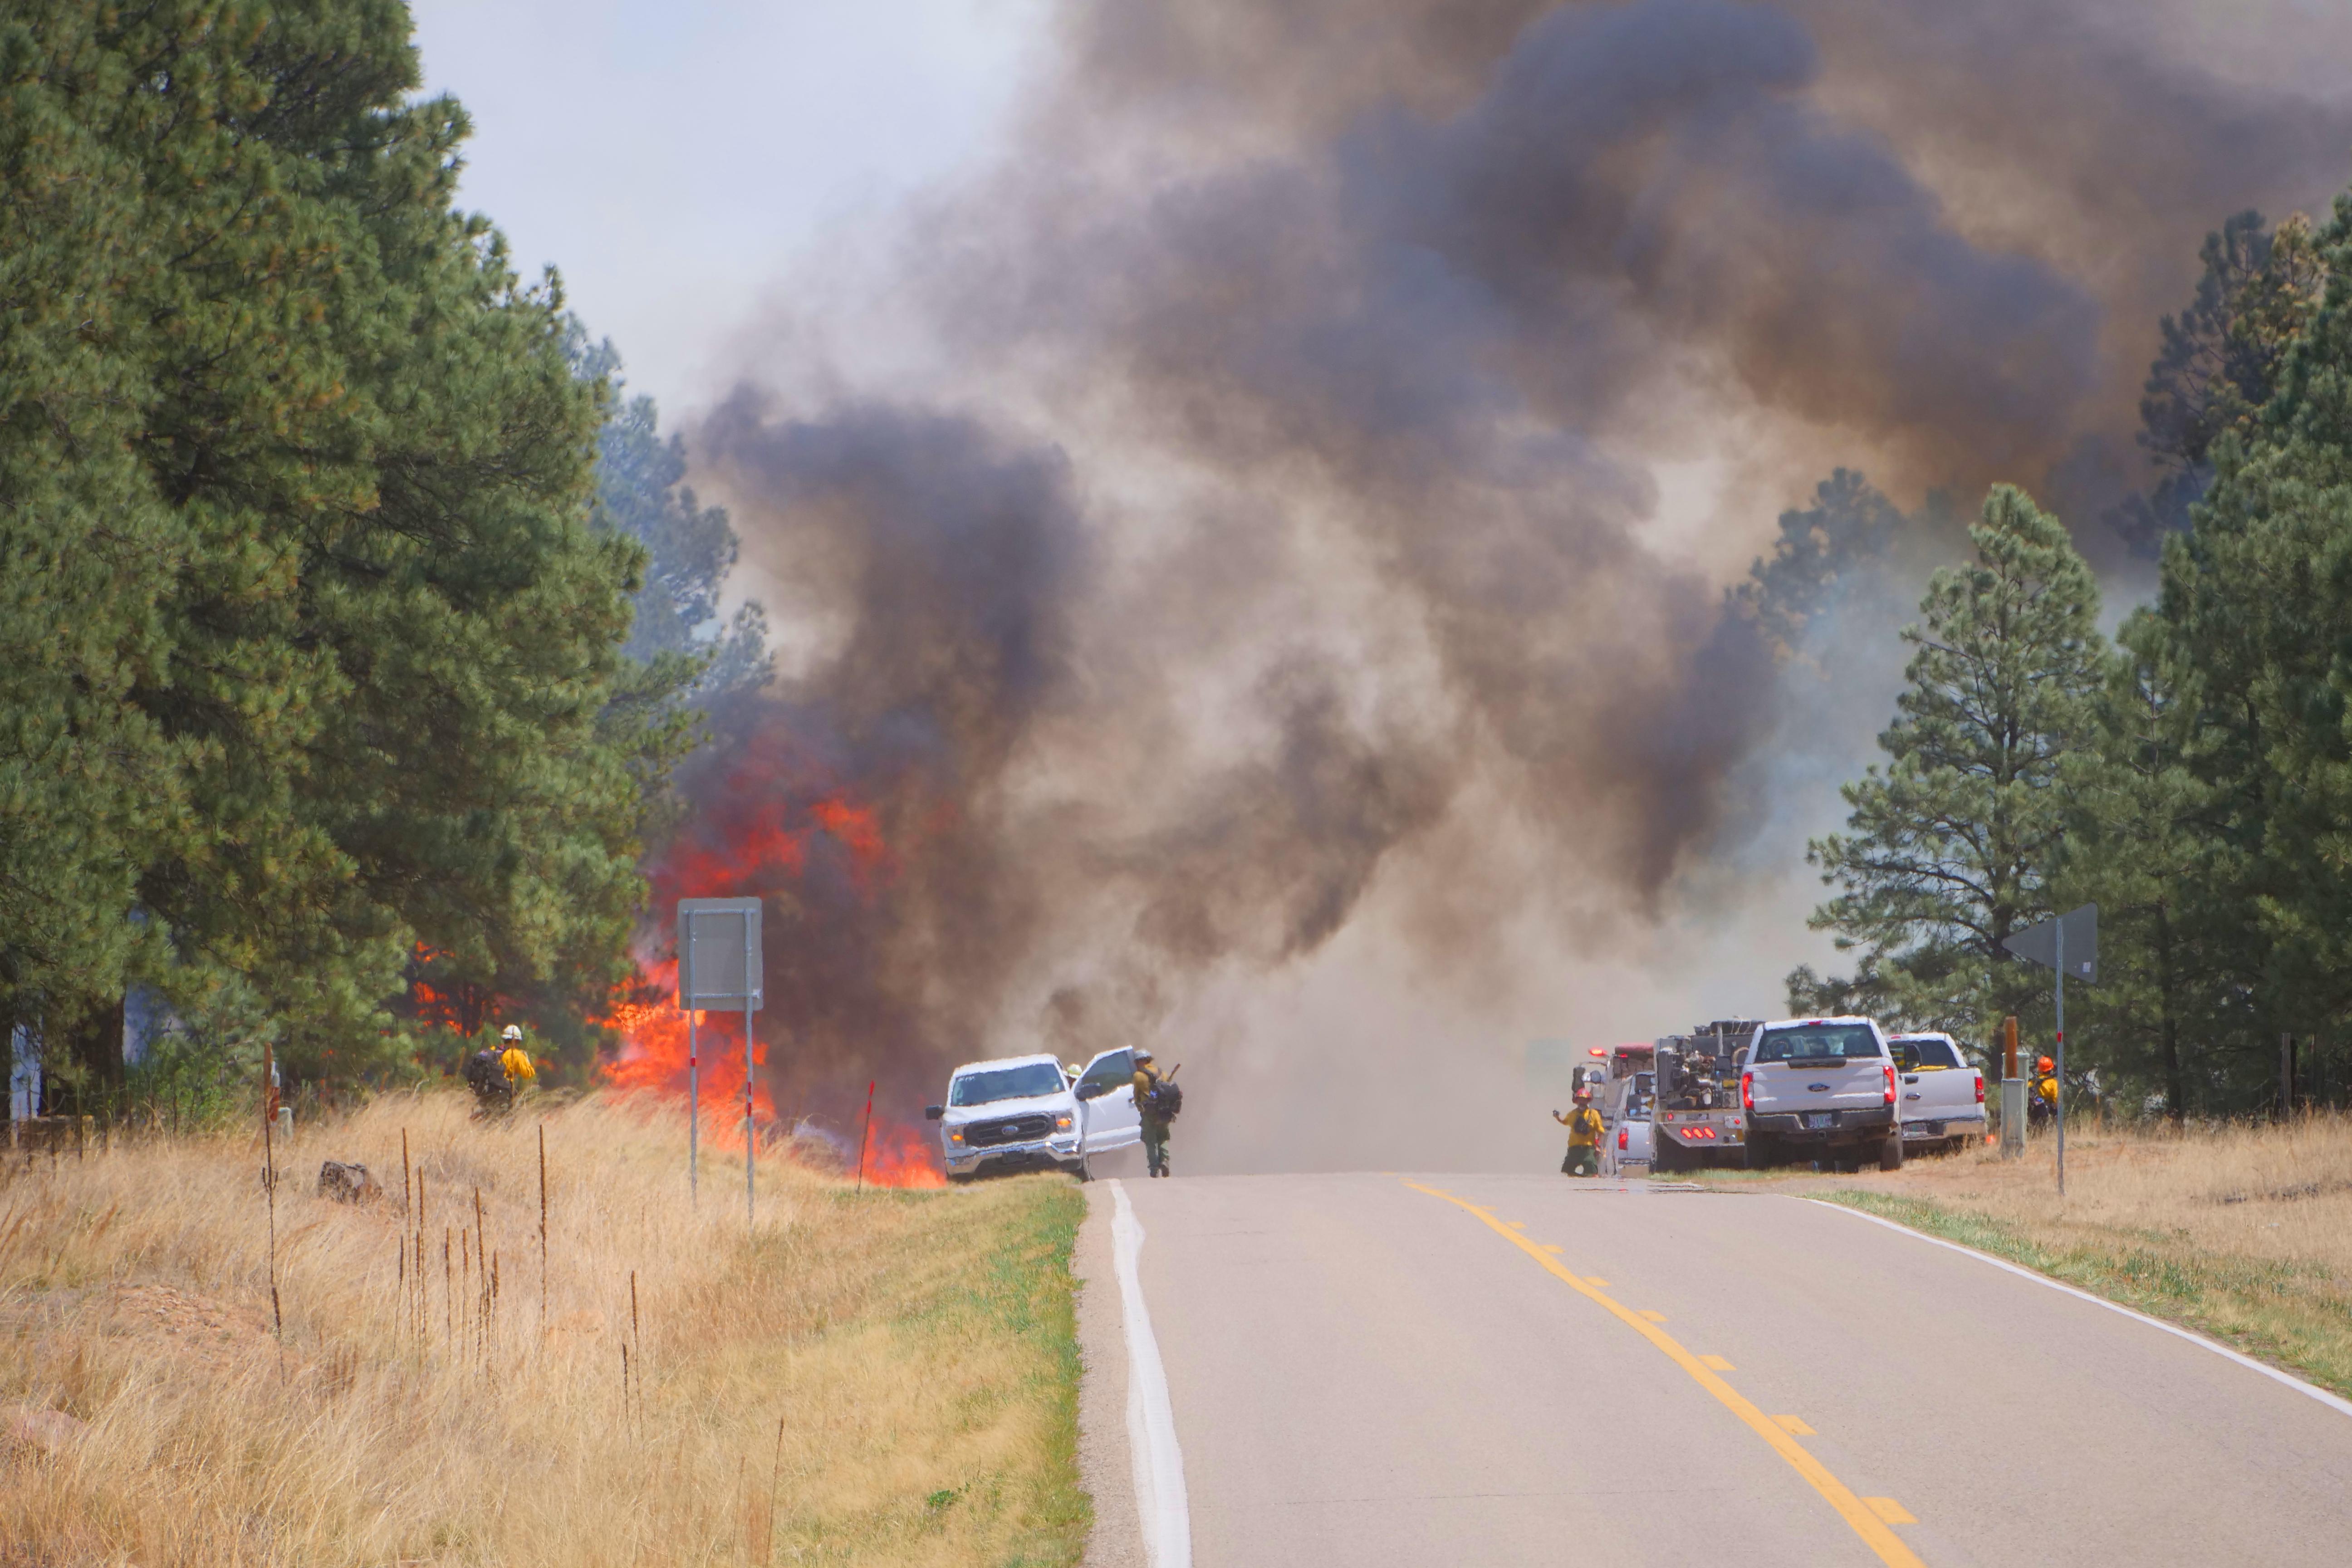 A paved highway is shown in the foreground with flames coming out of trees in the distance. Firefighters and fire trucks can be seen along the road.